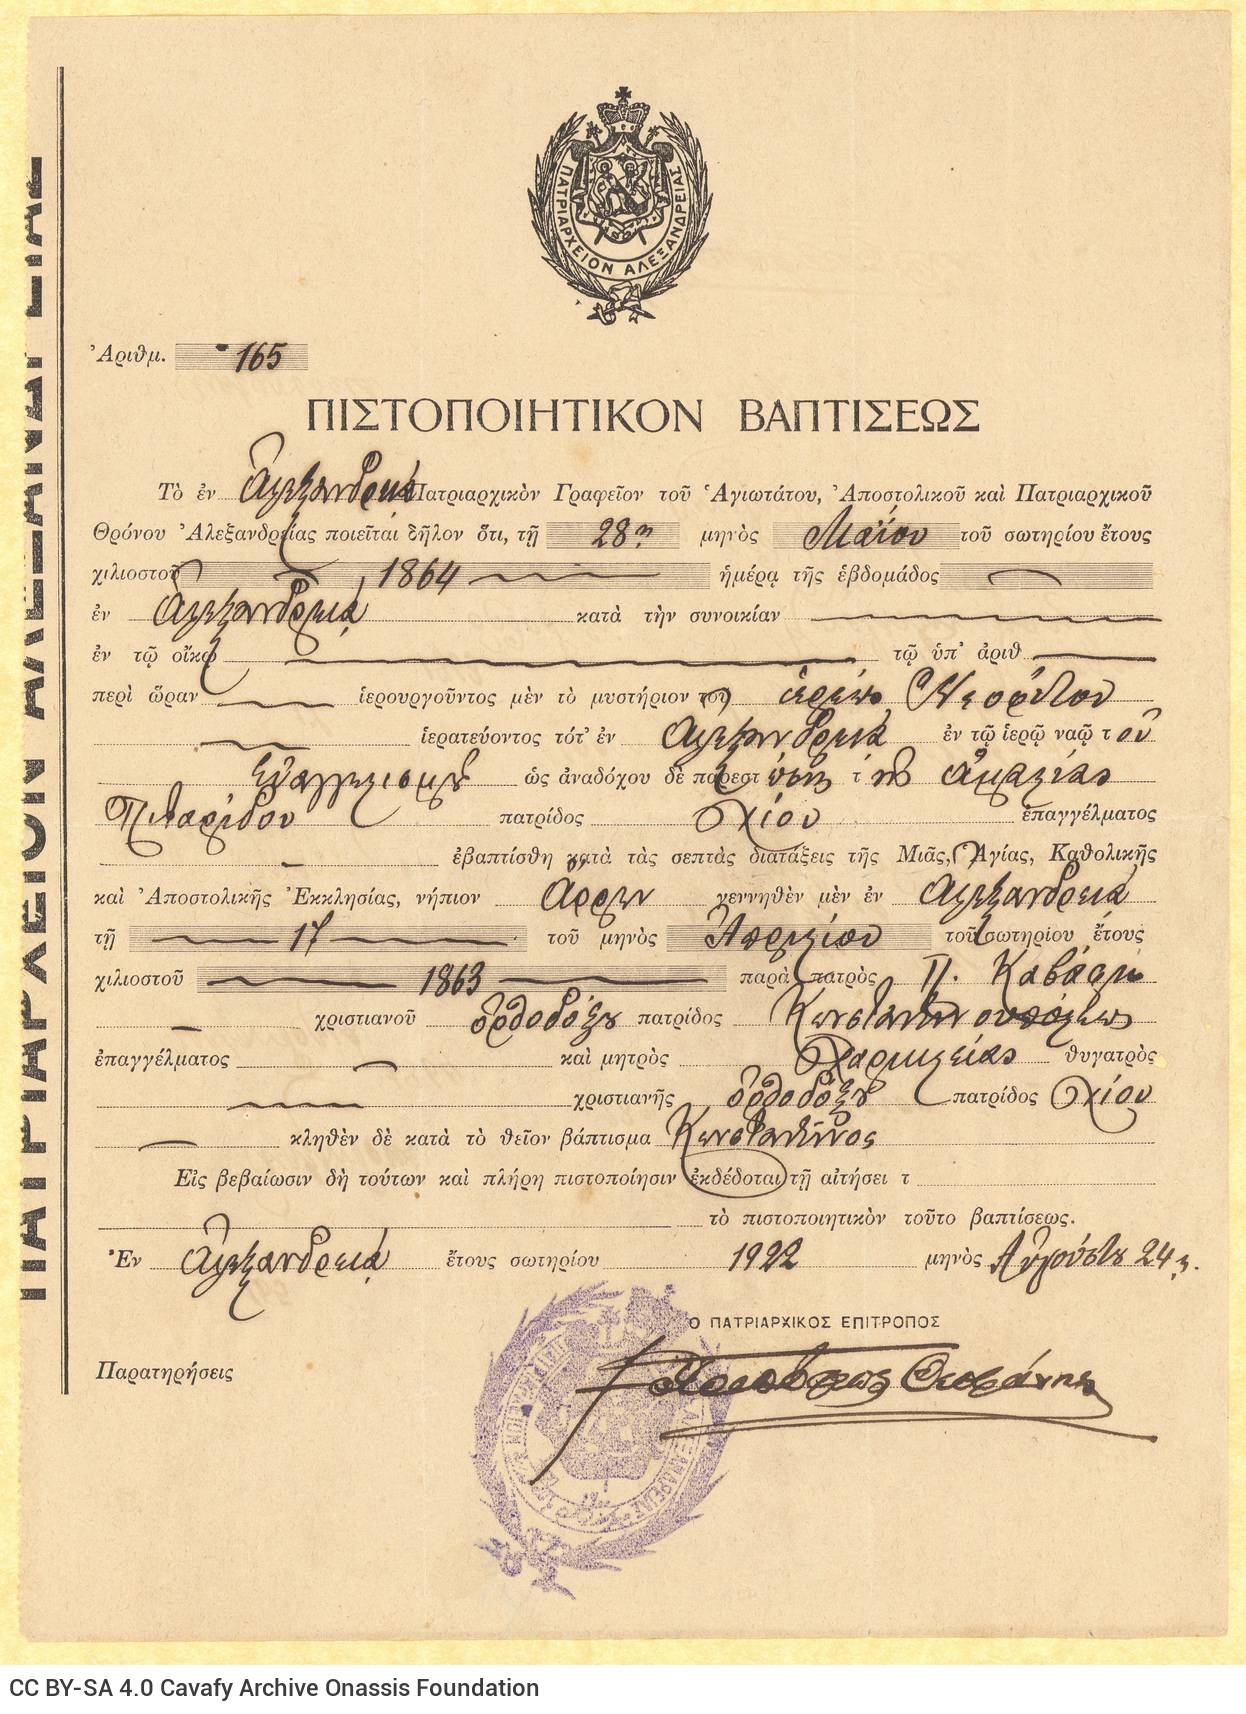 Cavafy's christening certificate, issued by the Patriarchate of Alexandria. It is the template of a form with the logo and se